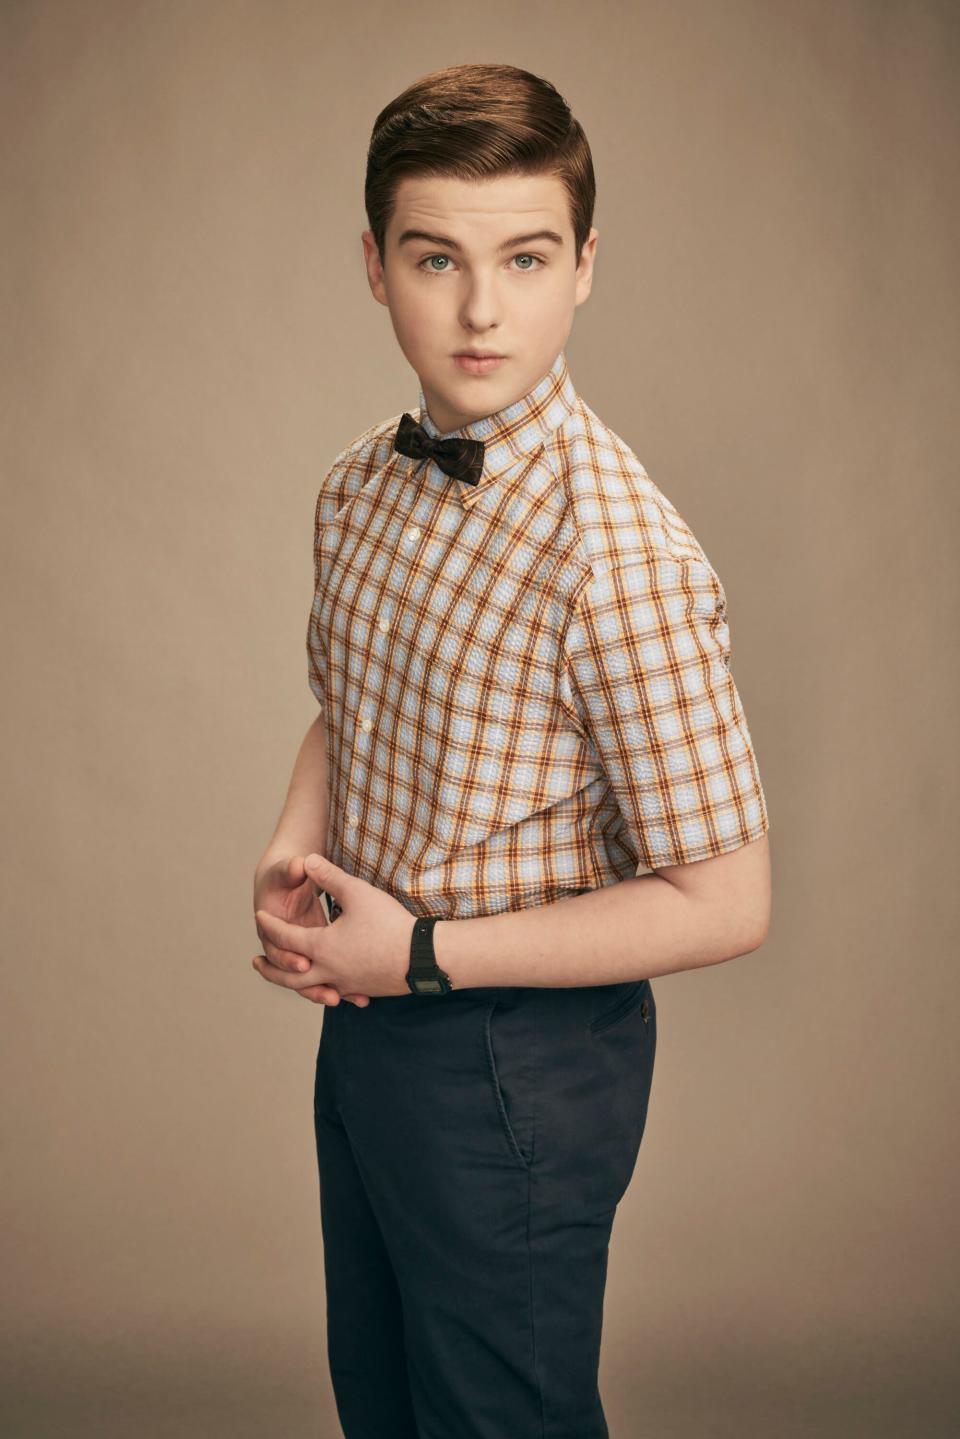 Iain Armitage as Sheldon from the CBS Original Series YOUNG SHELDON, scheduled to air on the CBS Television Network.